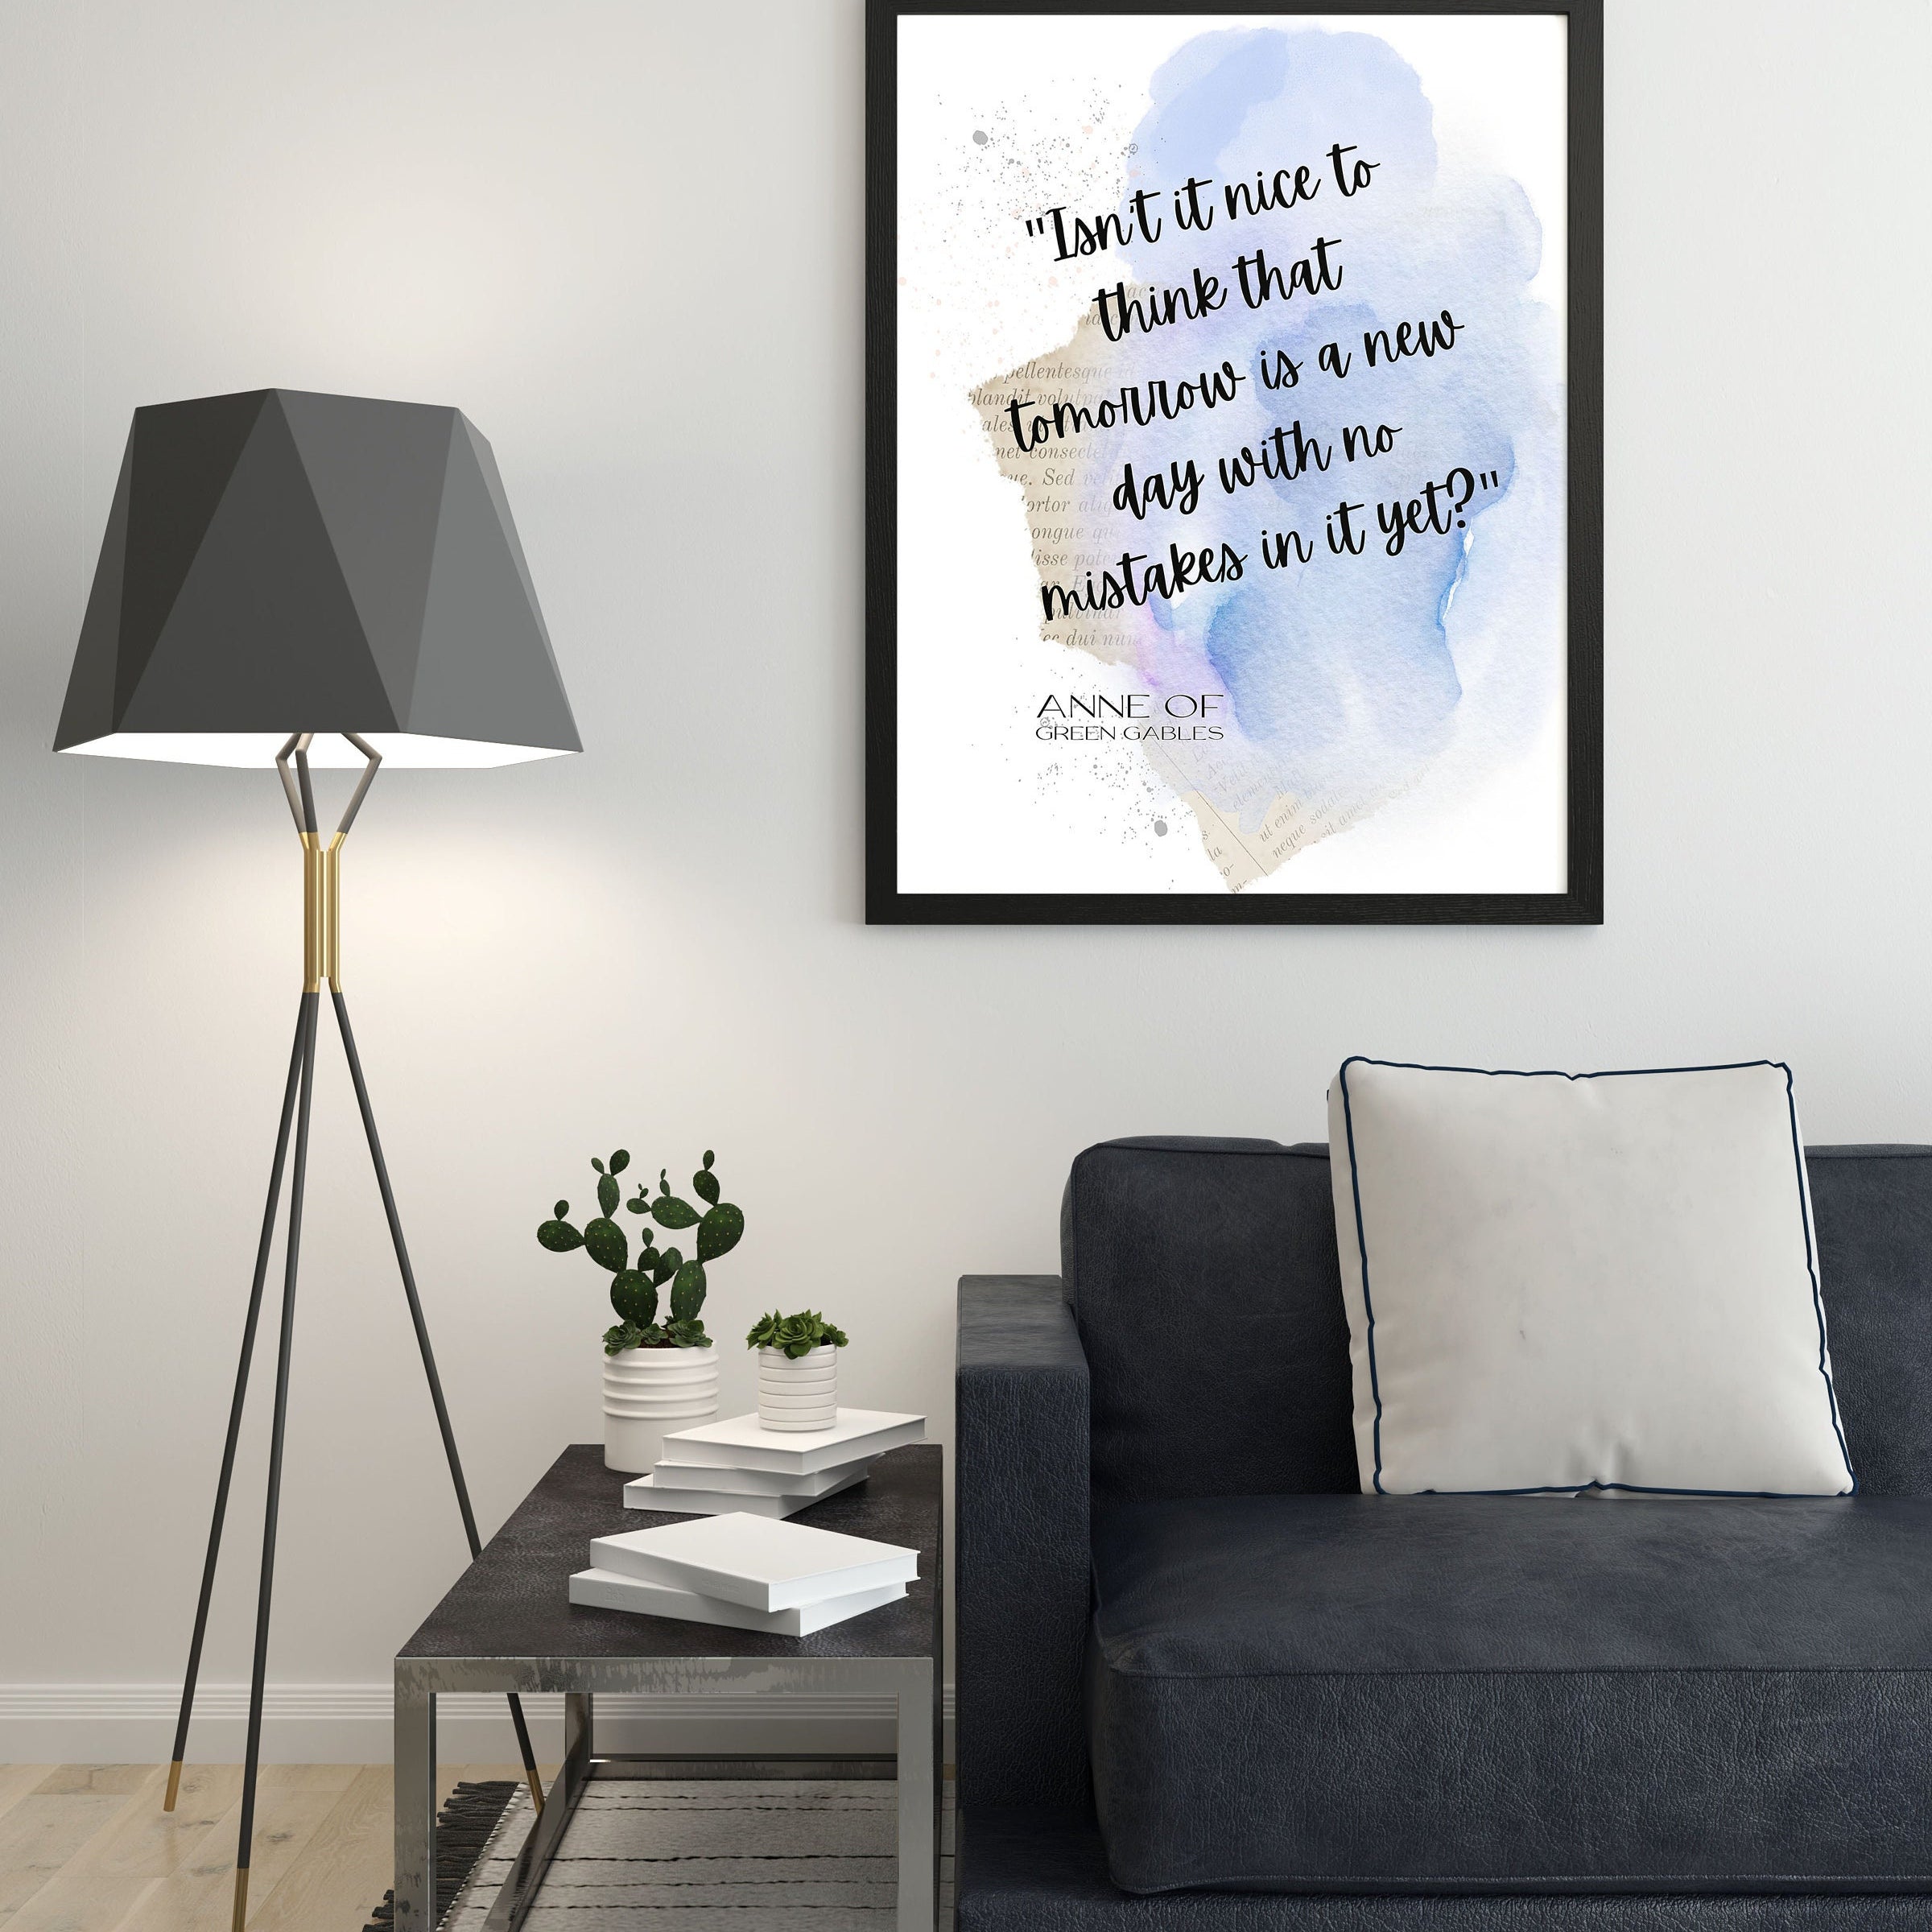 Anne of Green Gables Quote Print LM Montgomery, Tomorrow is a New Day With No Mistakes Inspirational Quote Wall Art Prints Framed / Unframed